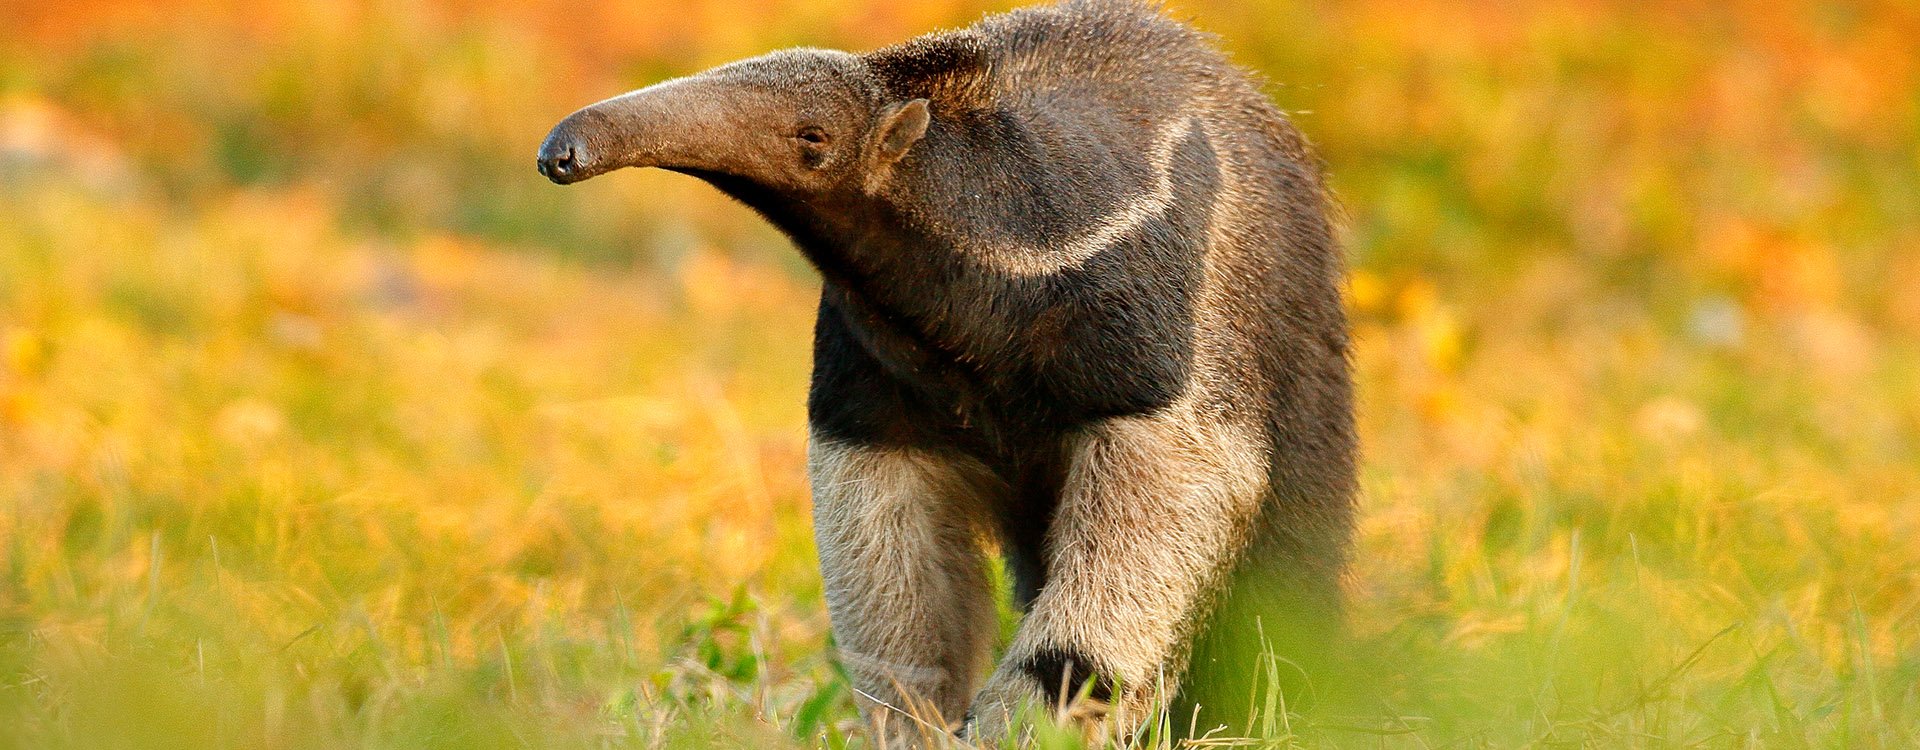 Giant Anteater, Myrmecophaga tridactyla, animal with long tail and log muzzle nose, Pantanal, Brazil. Wildlife scene. Running in pampas.